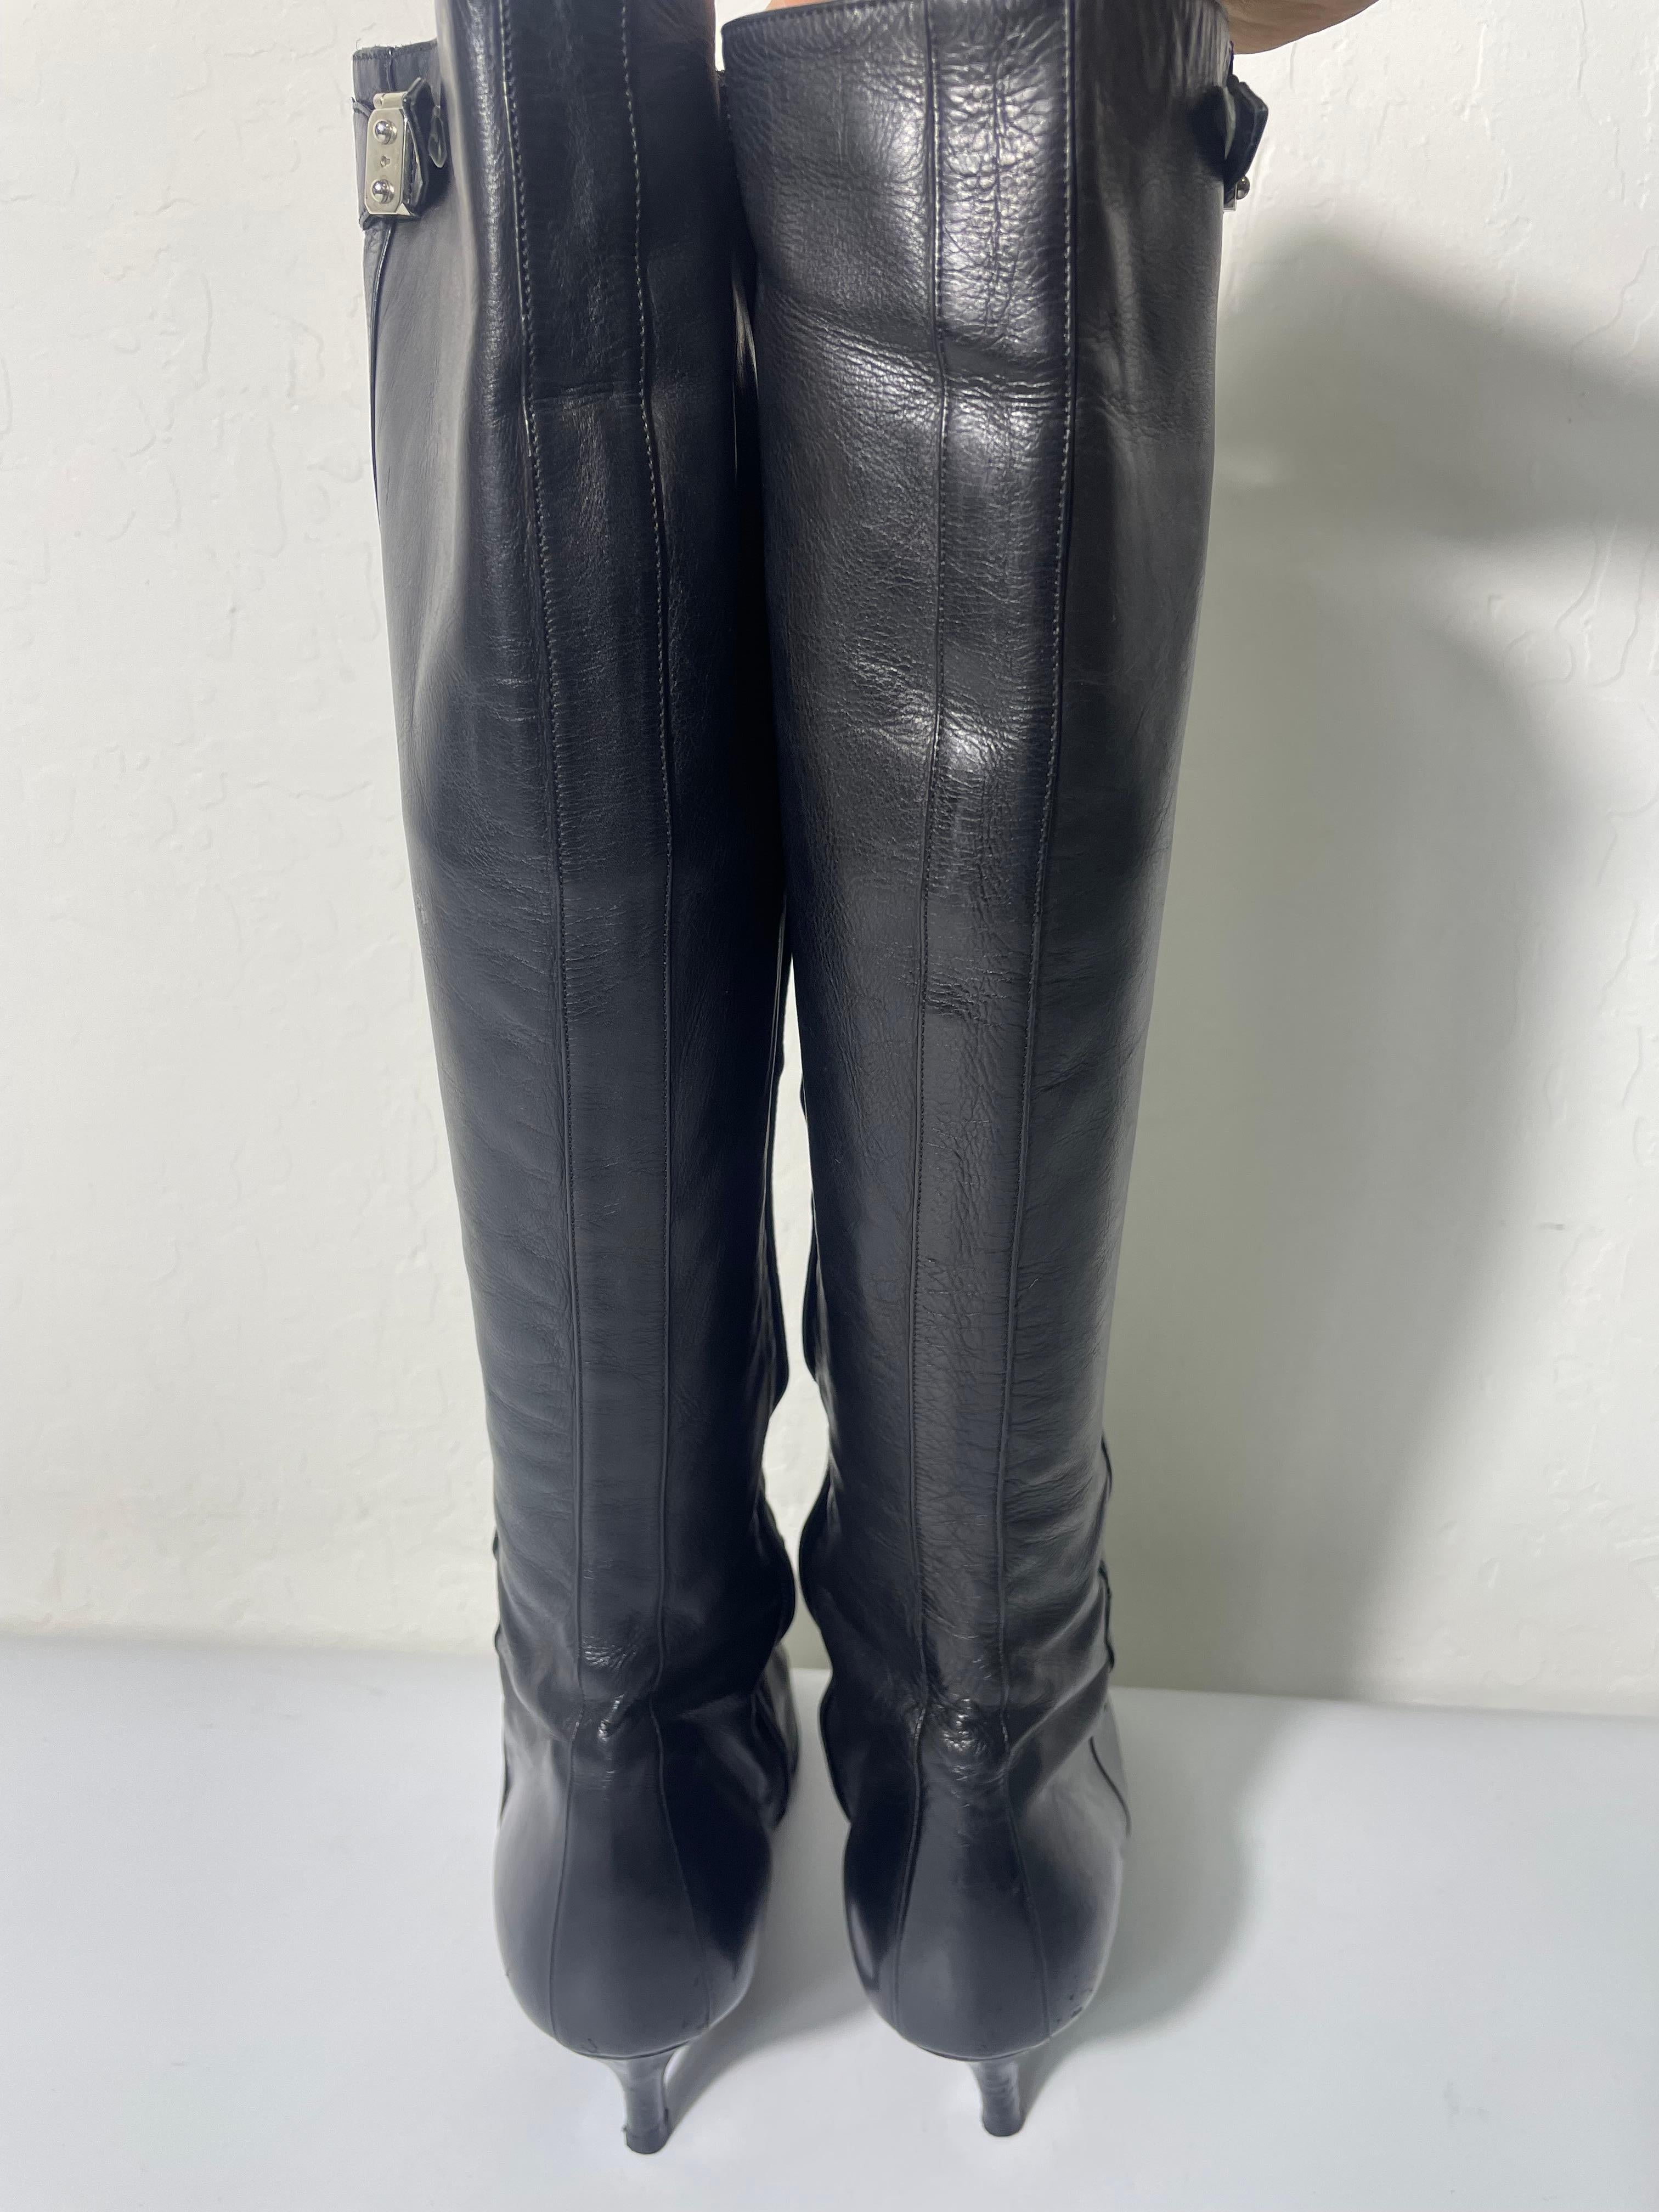 Hermes Black Leather Knee High Boots Buckle Detail Size 40 For Sale 1